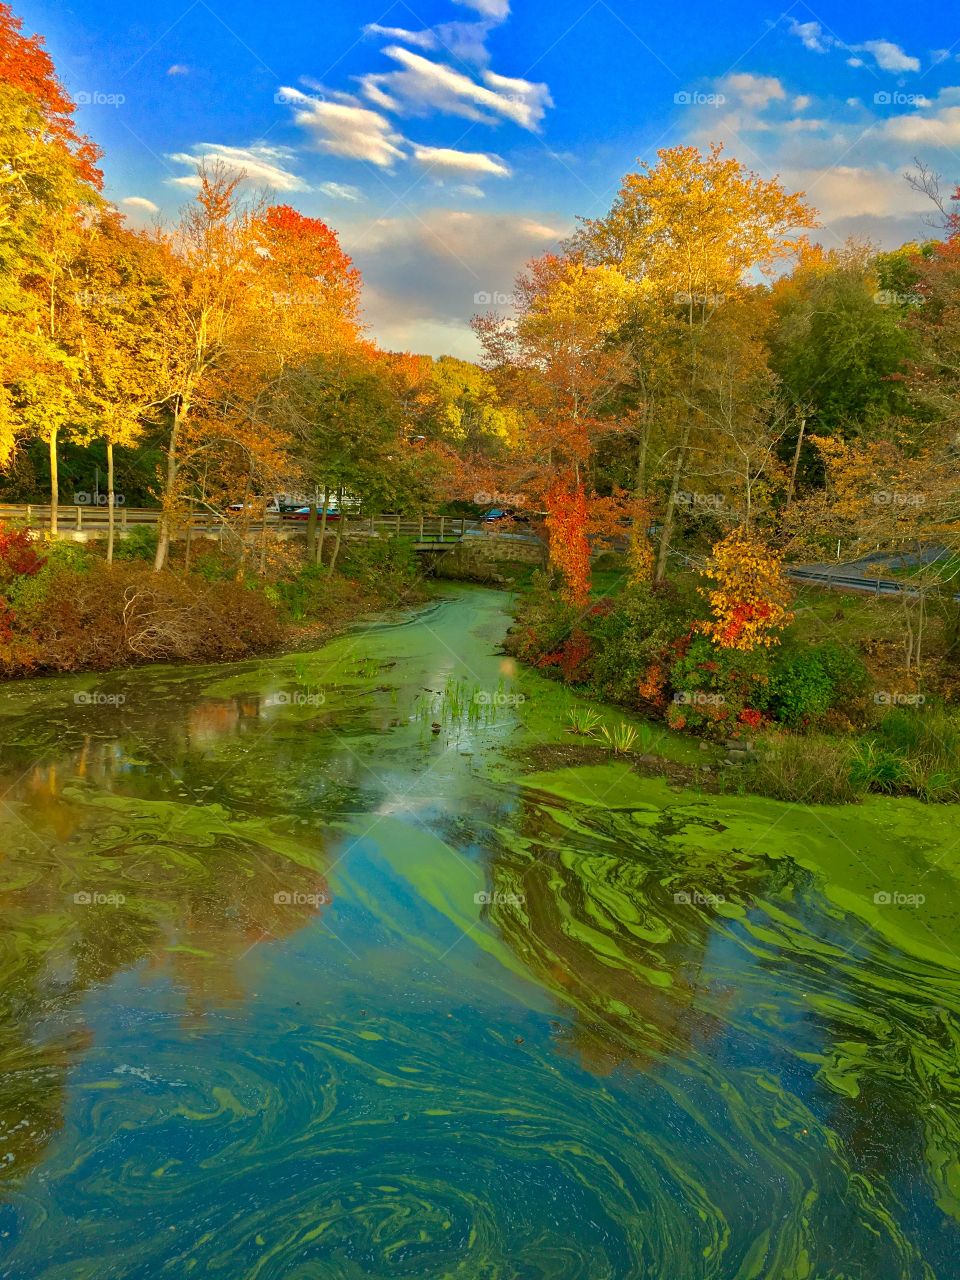 Autumn Riverscape

Green slime on the water's surface complements the  multi-colored foliage in this Autumn scene in Rhode Island.

